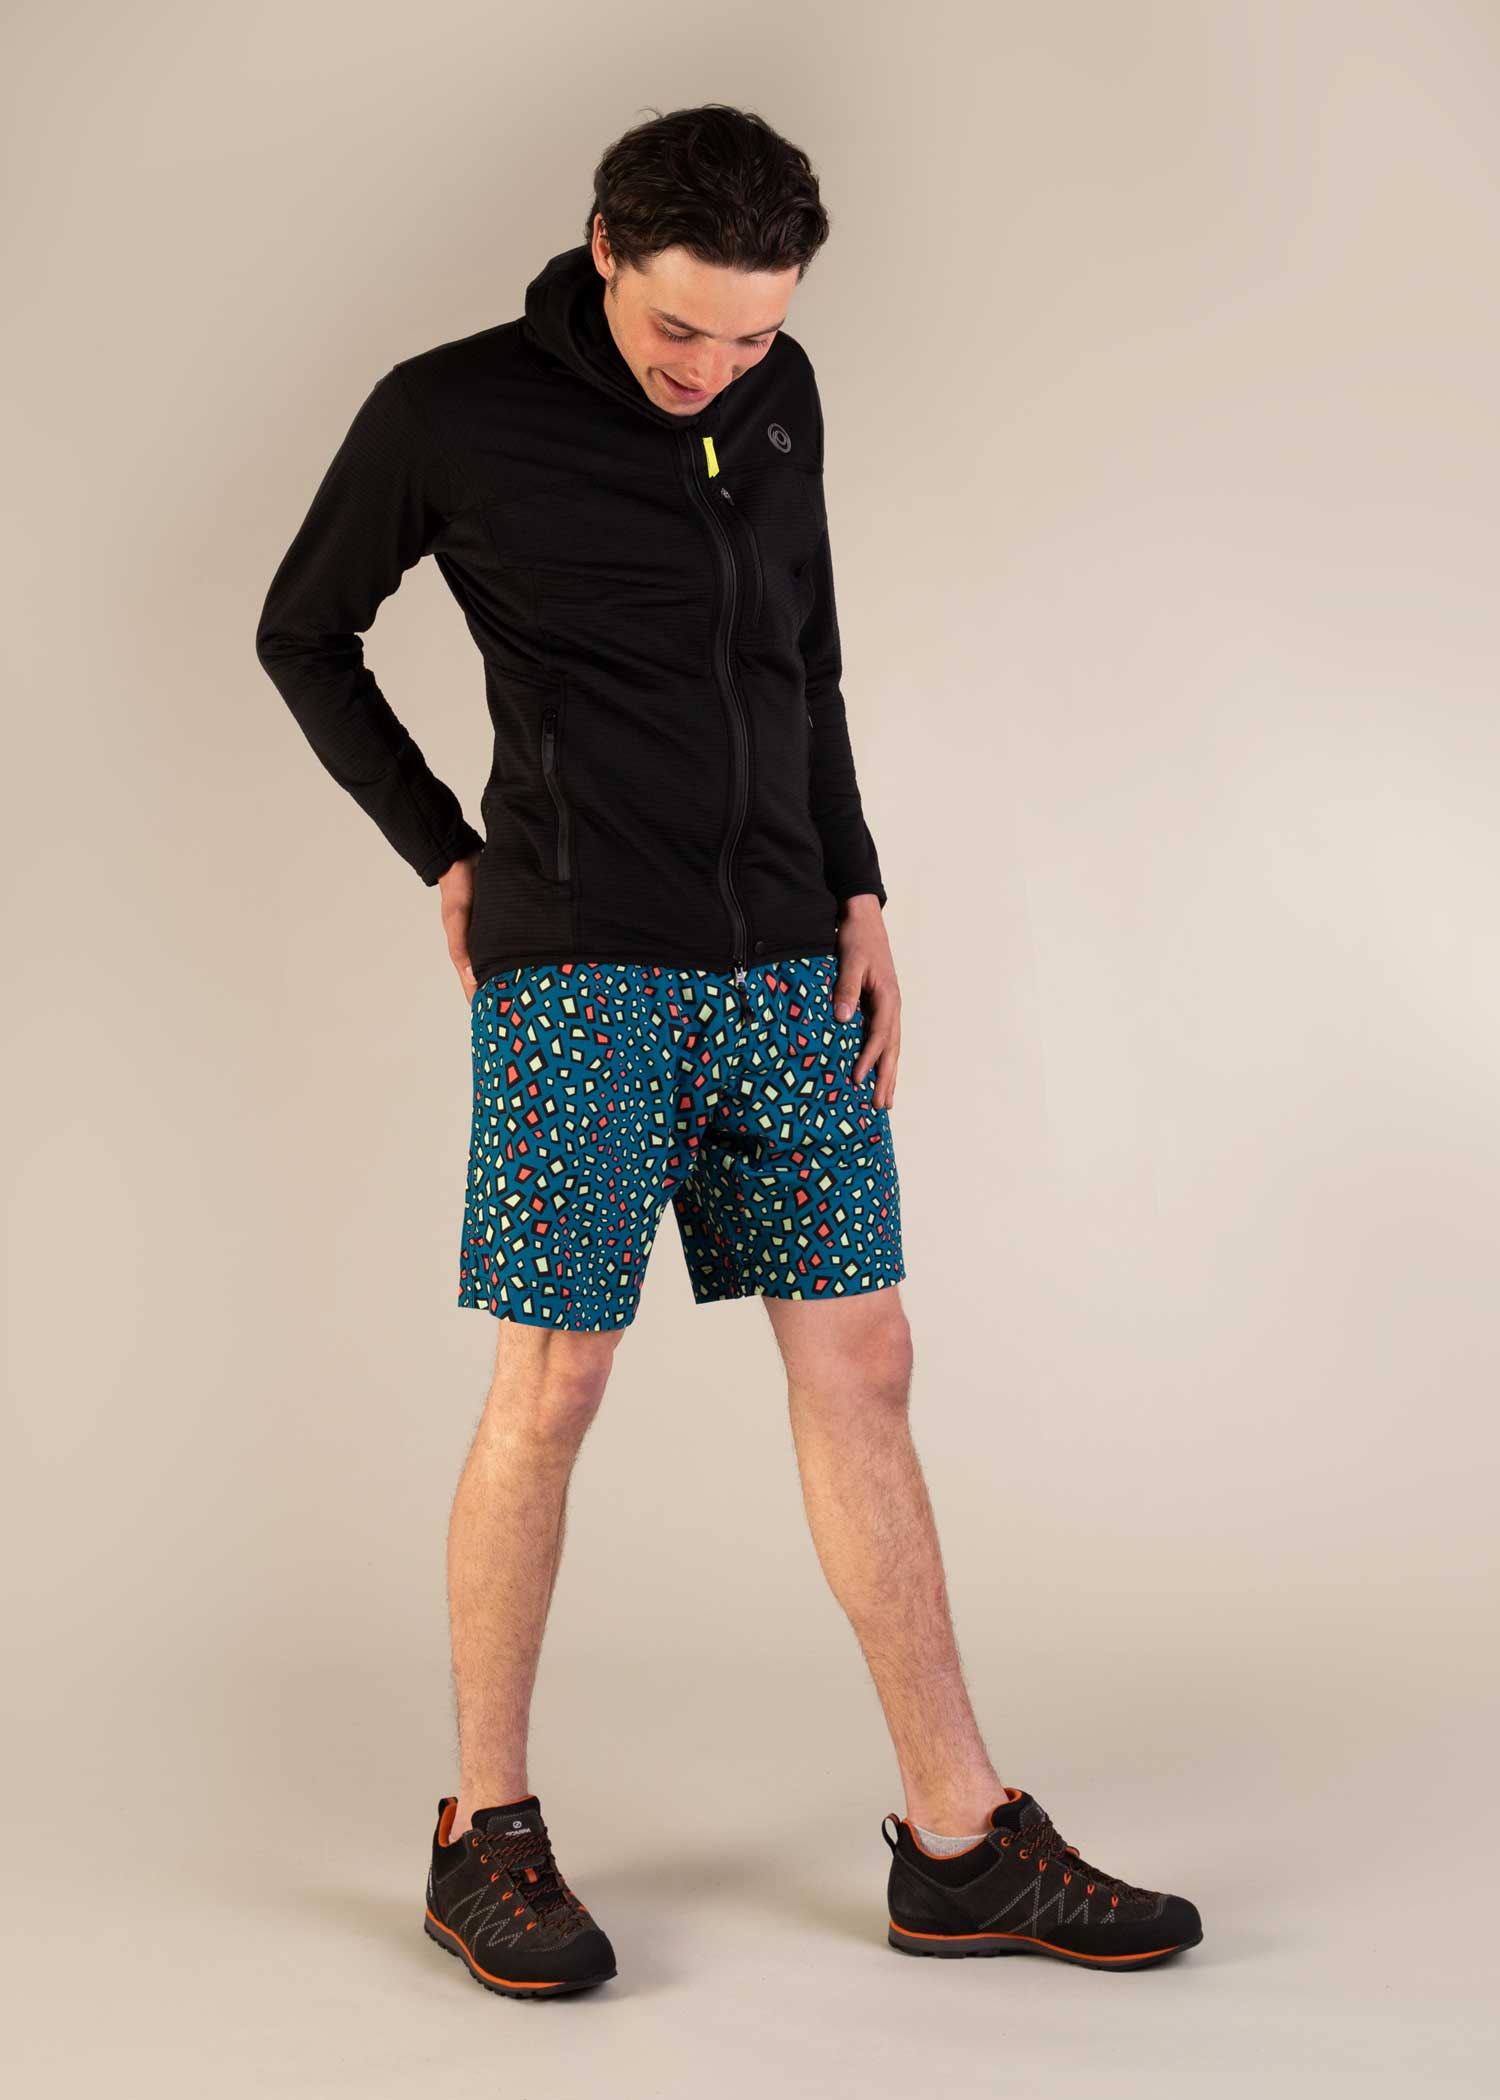 3RD ROCK Sustainable funky patterned shorts - Kai is 6ft 1" with a 32" waist and is wearing a 32. M